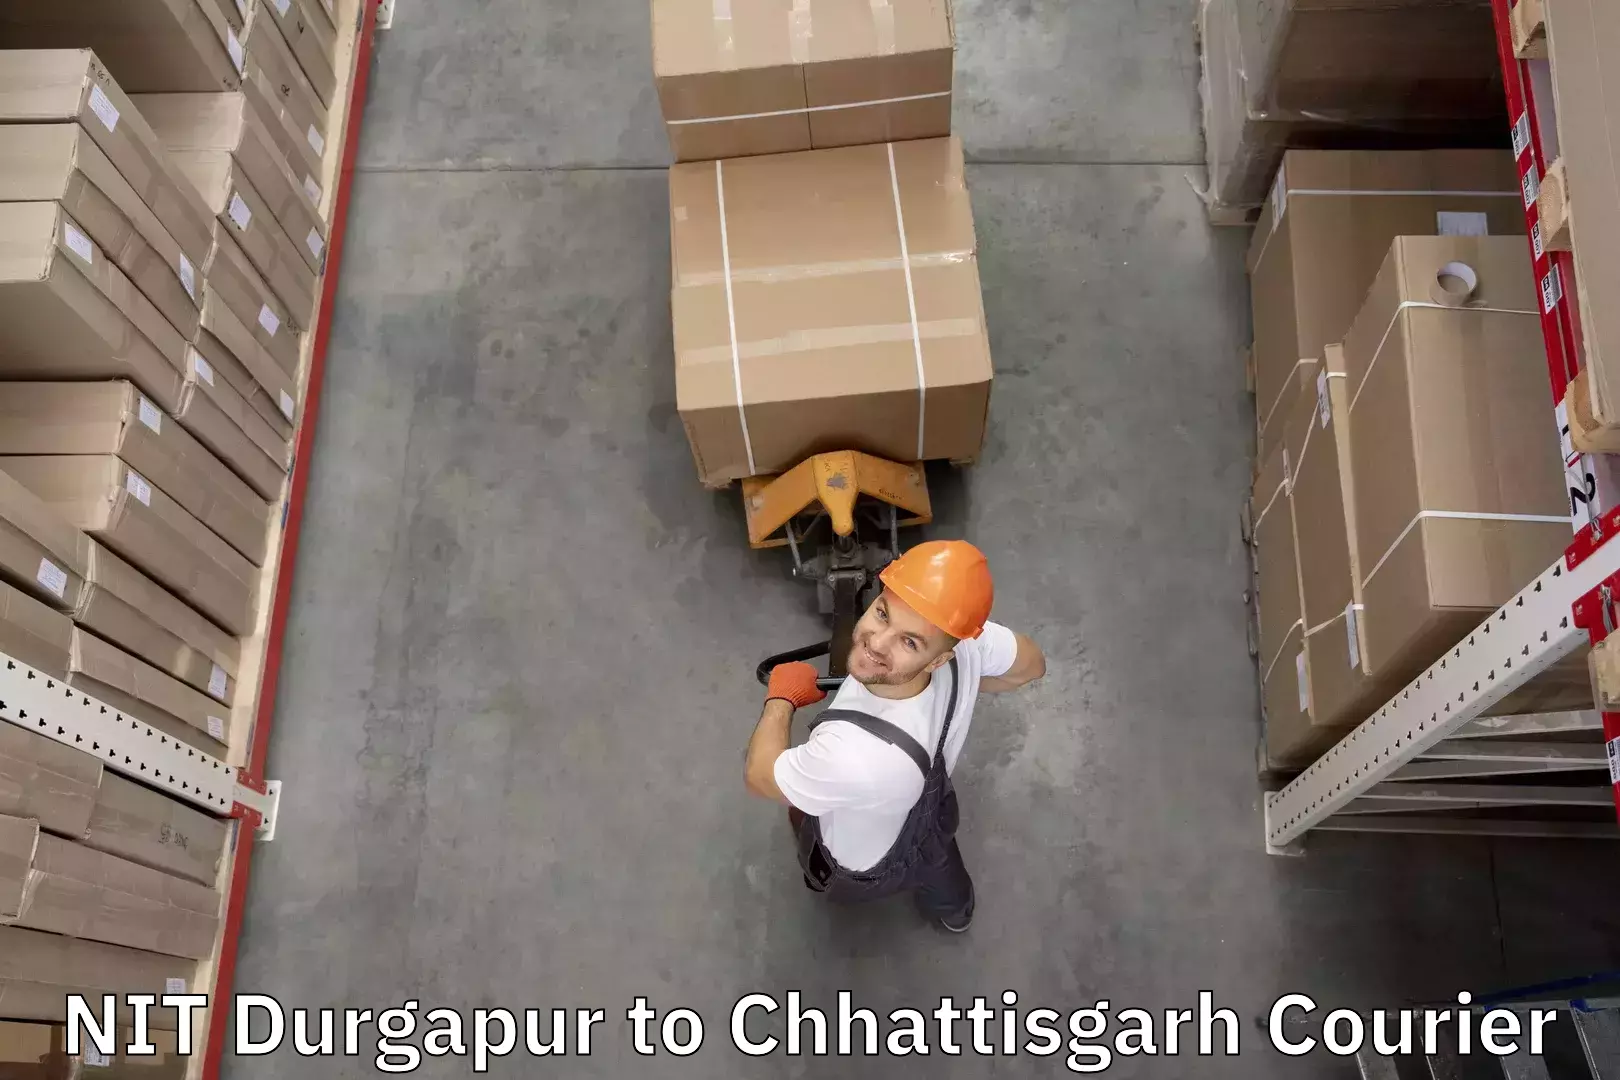 Luggage shipment specialists NIT Durgapur to Pathalgaon